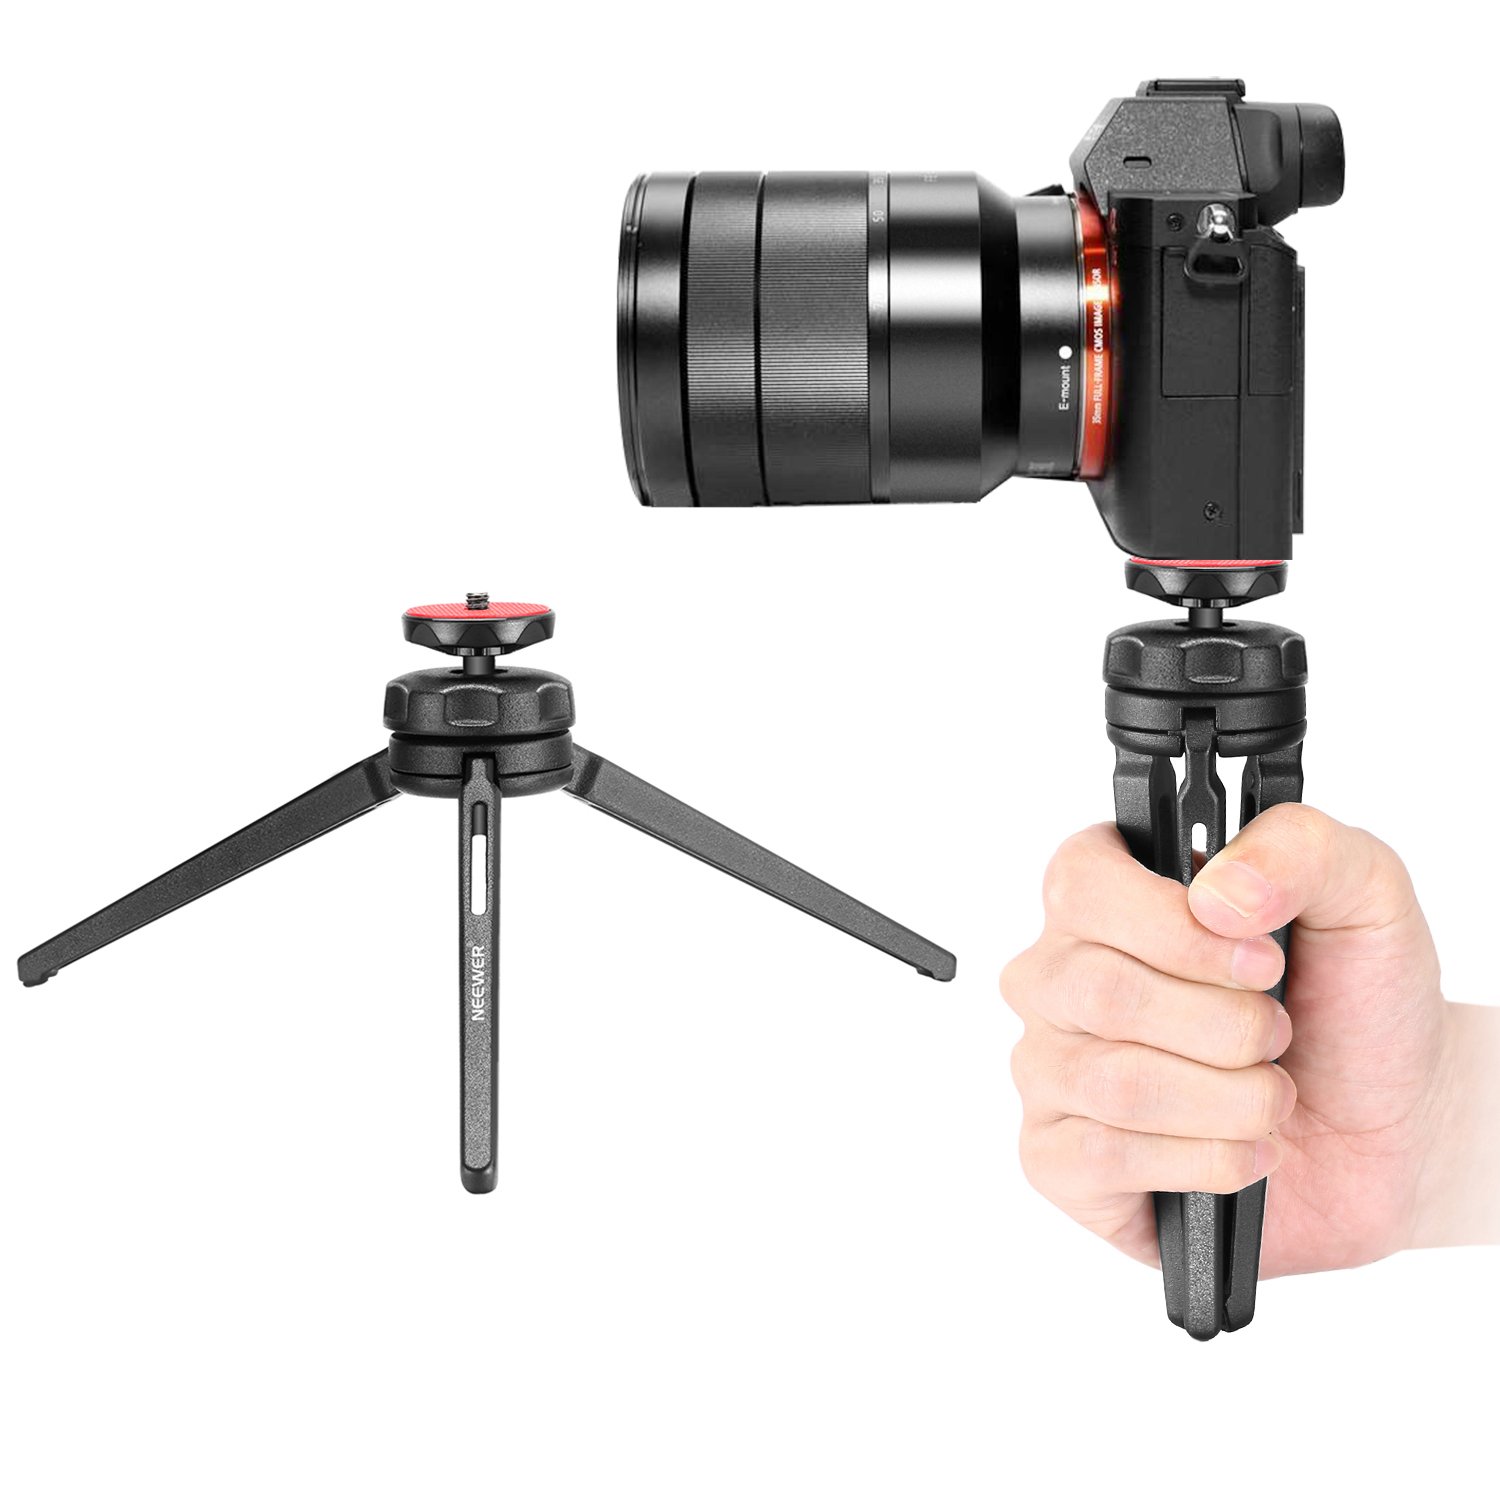 Neewer Mini Tabletop Tripod Stabilizer Grip, Lightweight Portable Aluminum Alloy Stand with Swivel Ball Head for DSLR Cameras, Smartphones, Video Camcorders up to 6.6 pounds/3 kilograms (Black)